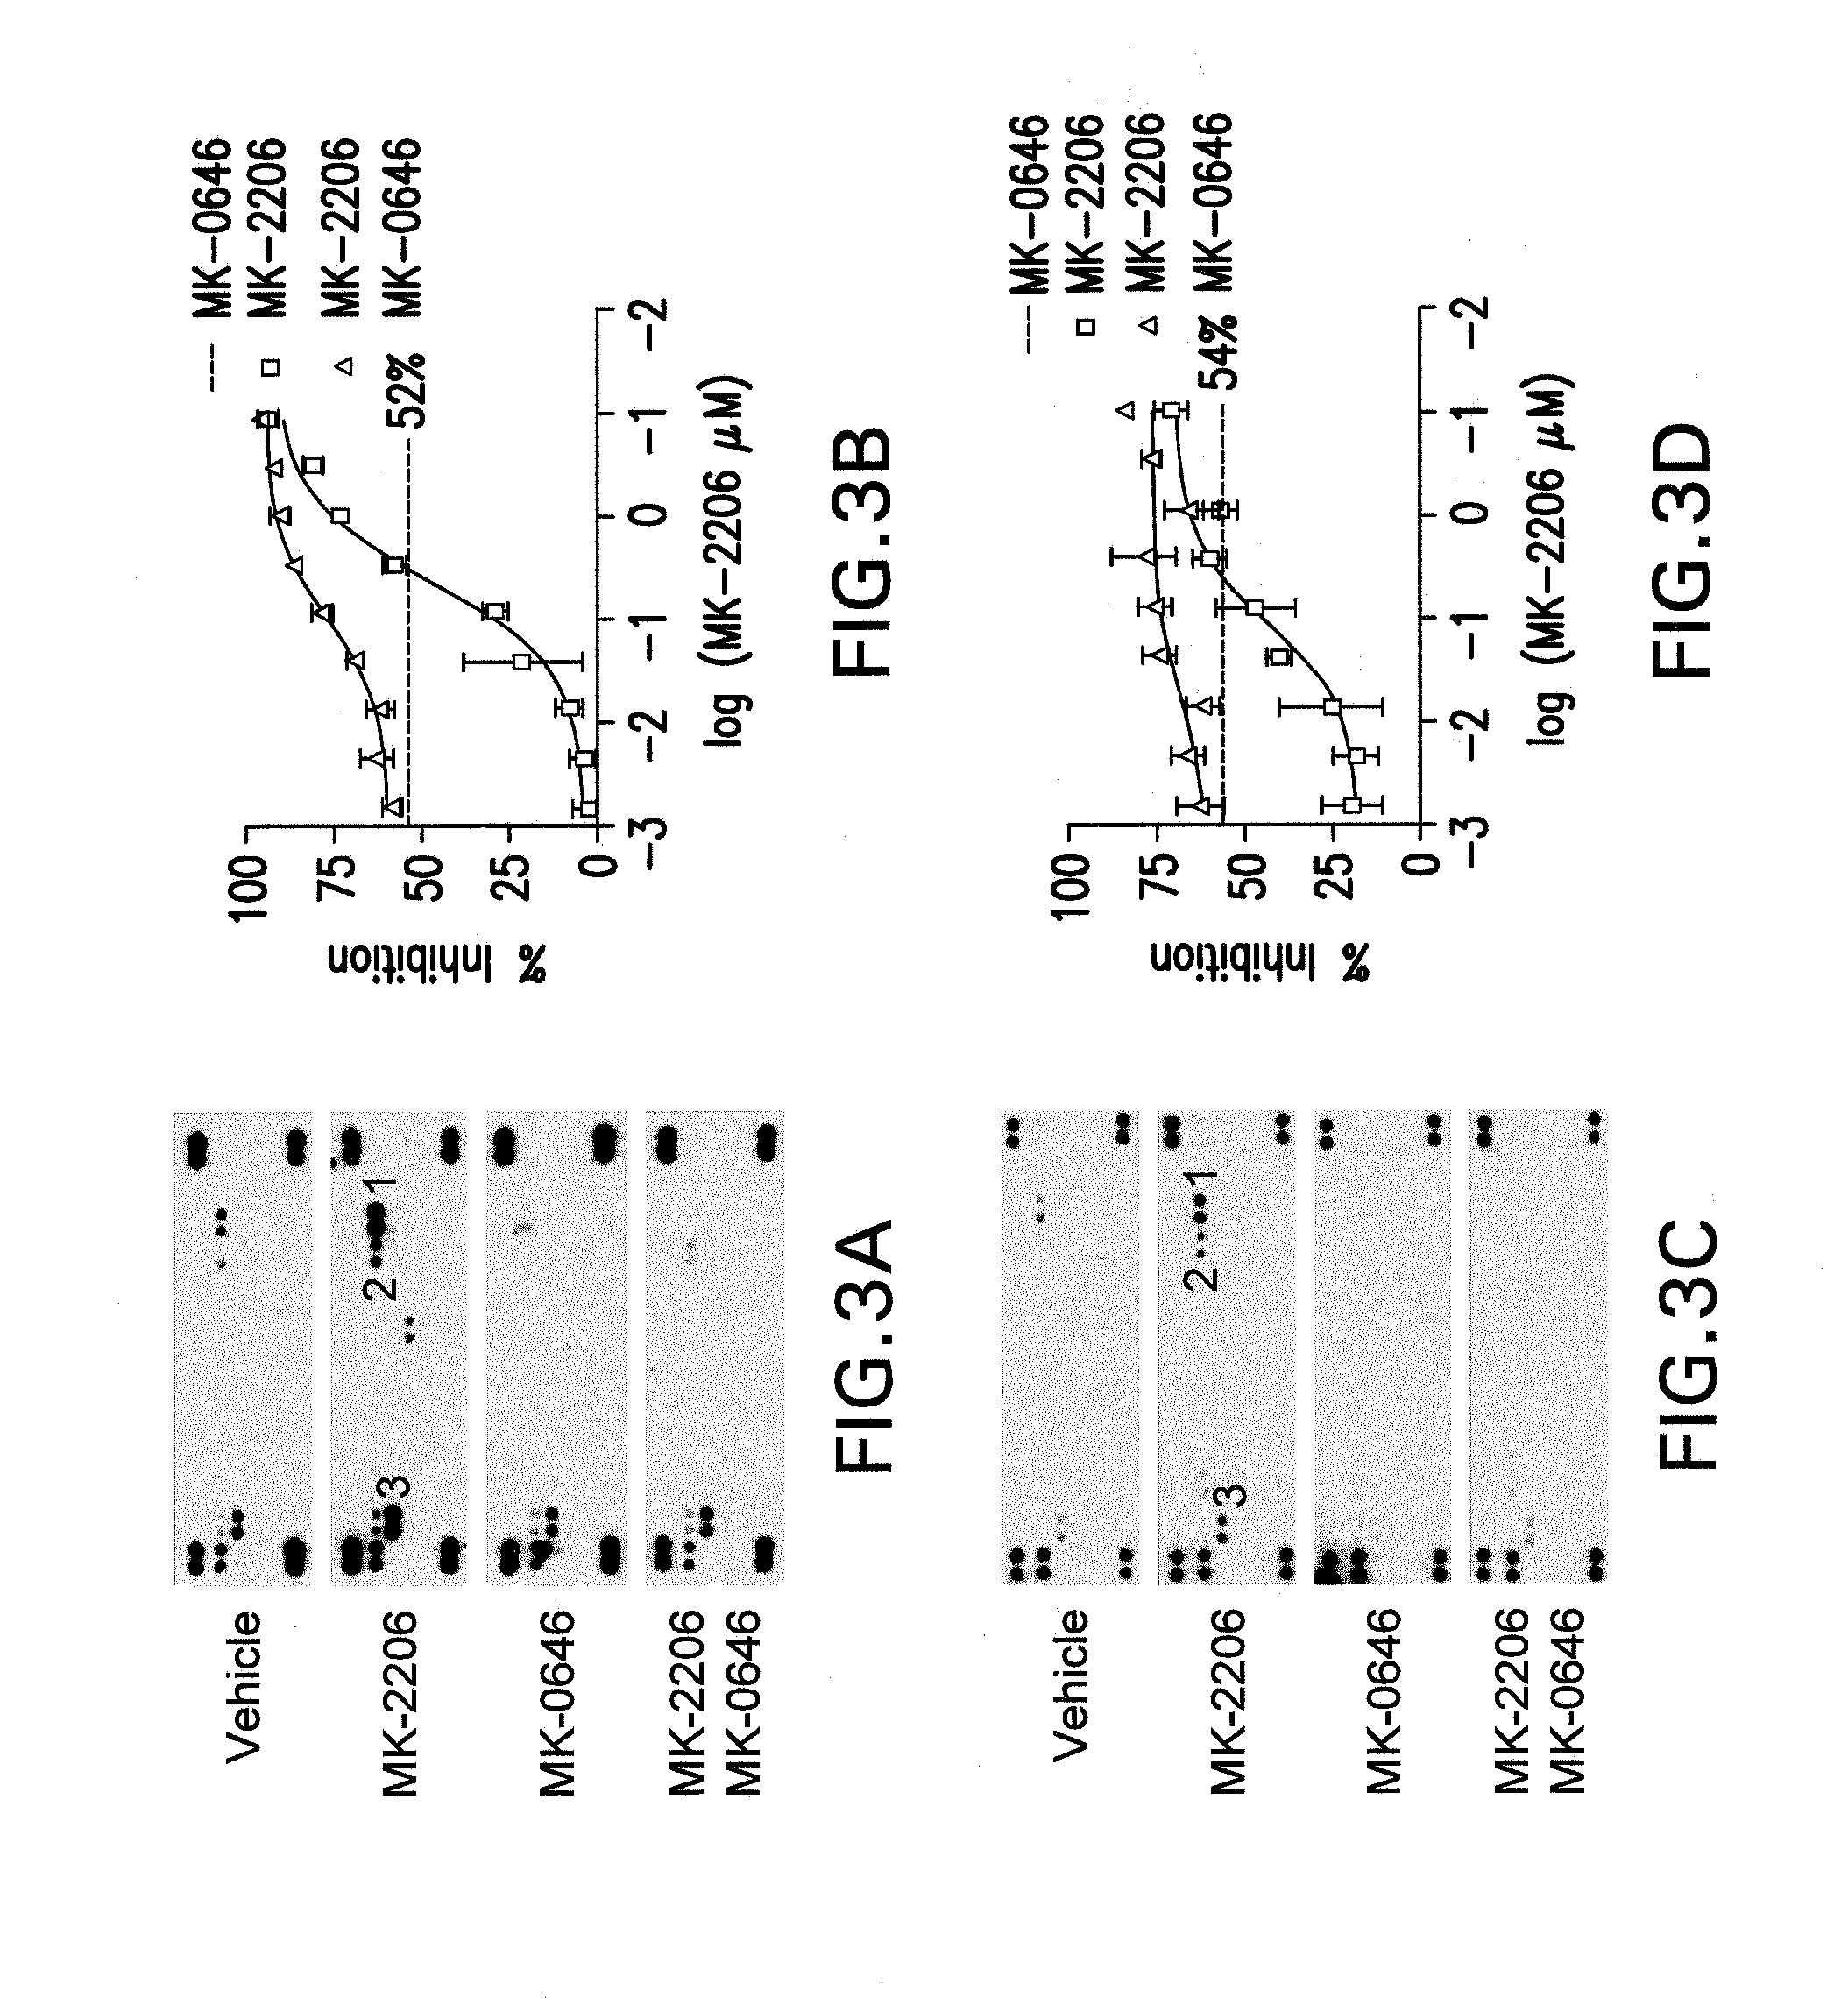 Combination therapy for treating cancer comprising an igf-1r inhibitor and an akt inhibitor